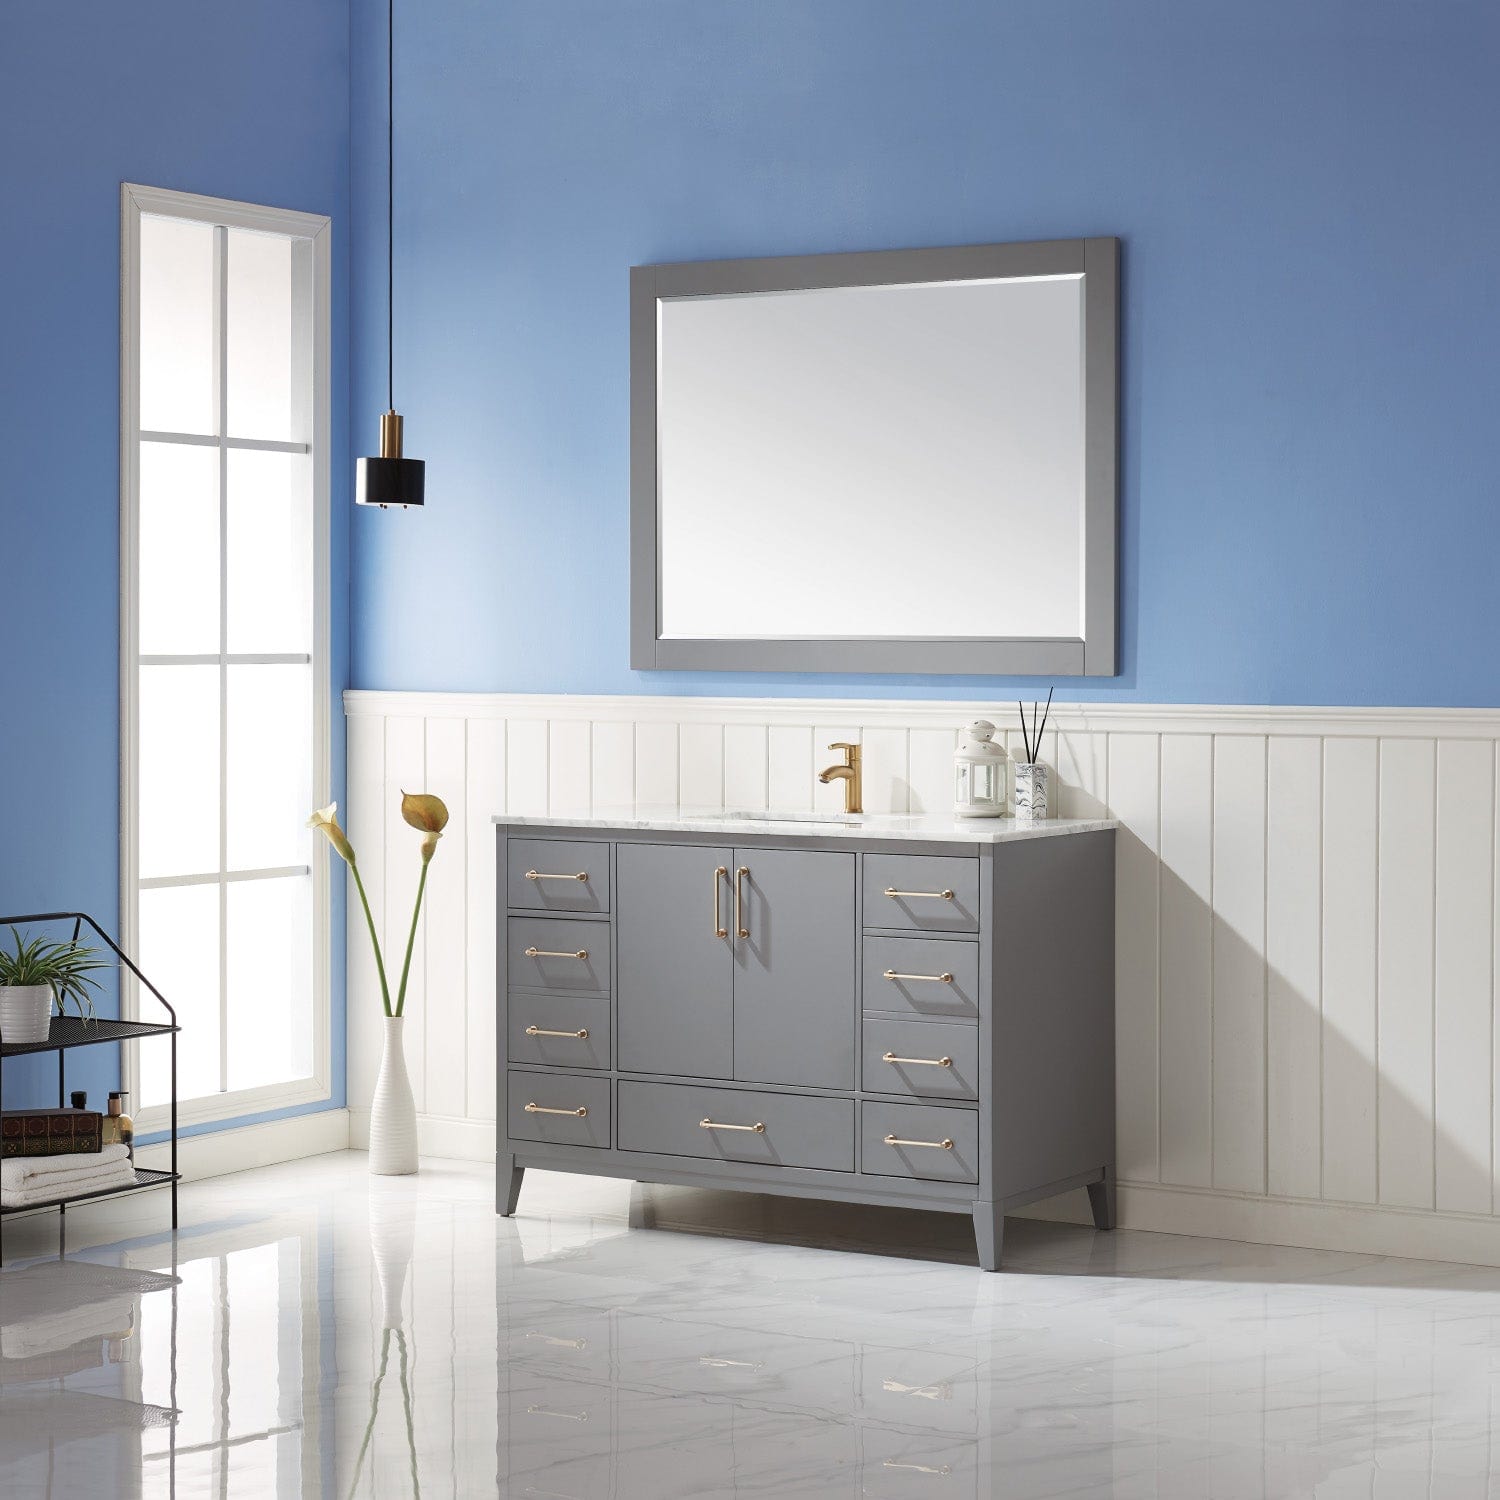 Altair Sutton 48" Single Bathroom Vanity Set in Gray and Carrara White Marble Countertop with Mirror 541048-GR-CA - Molaix631112971874Vanity541048-GR-CA